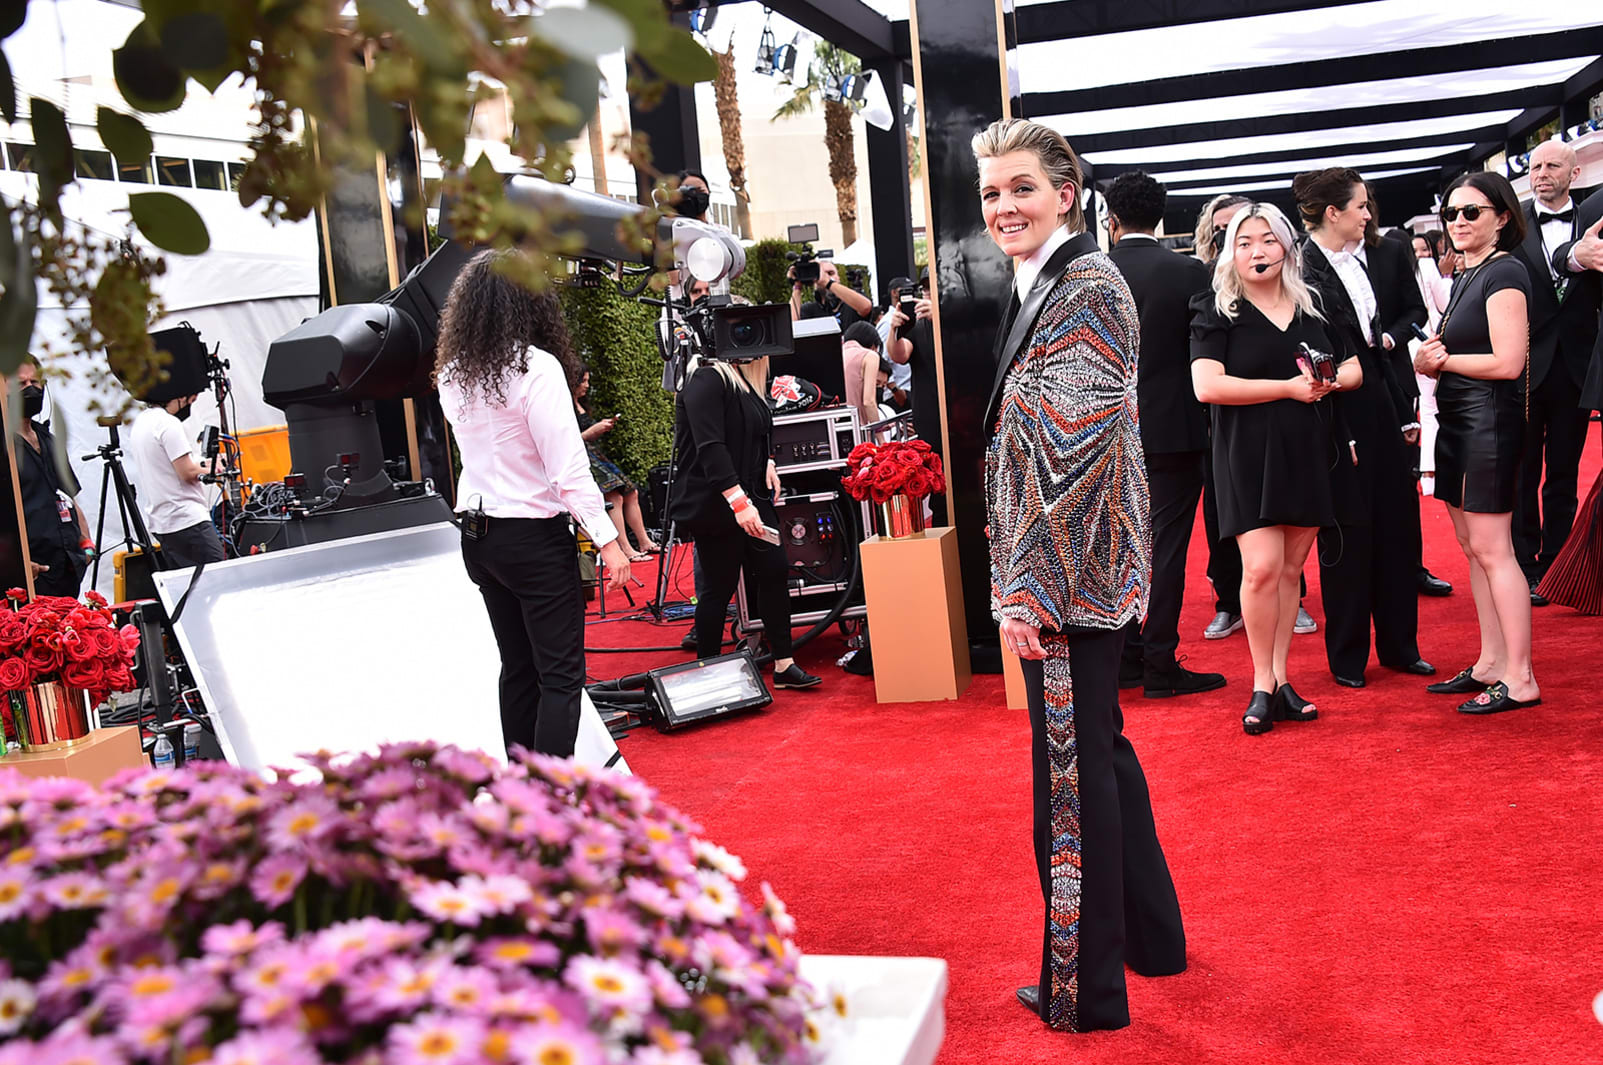 Brandi Carlile walked the red carpet in a multicolored-striped tuxedo adorned with rhinestones and slick-backed hair. 